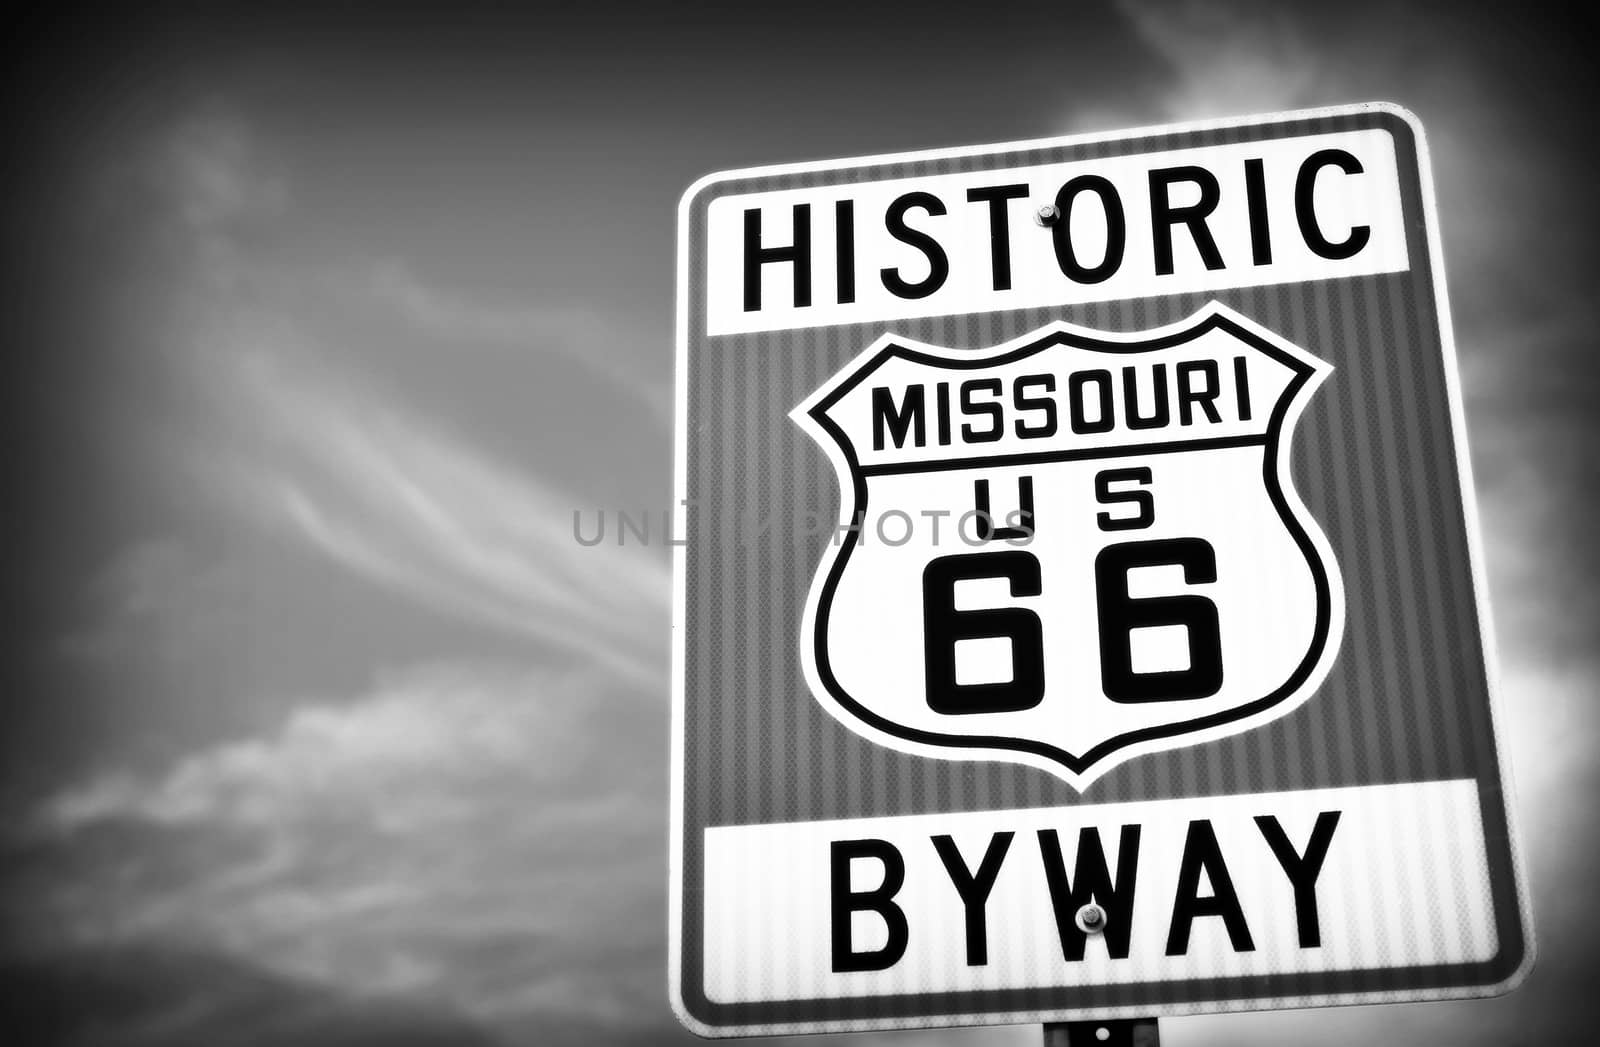 Historic route 66 highway sign in Missouri USA. Black and white